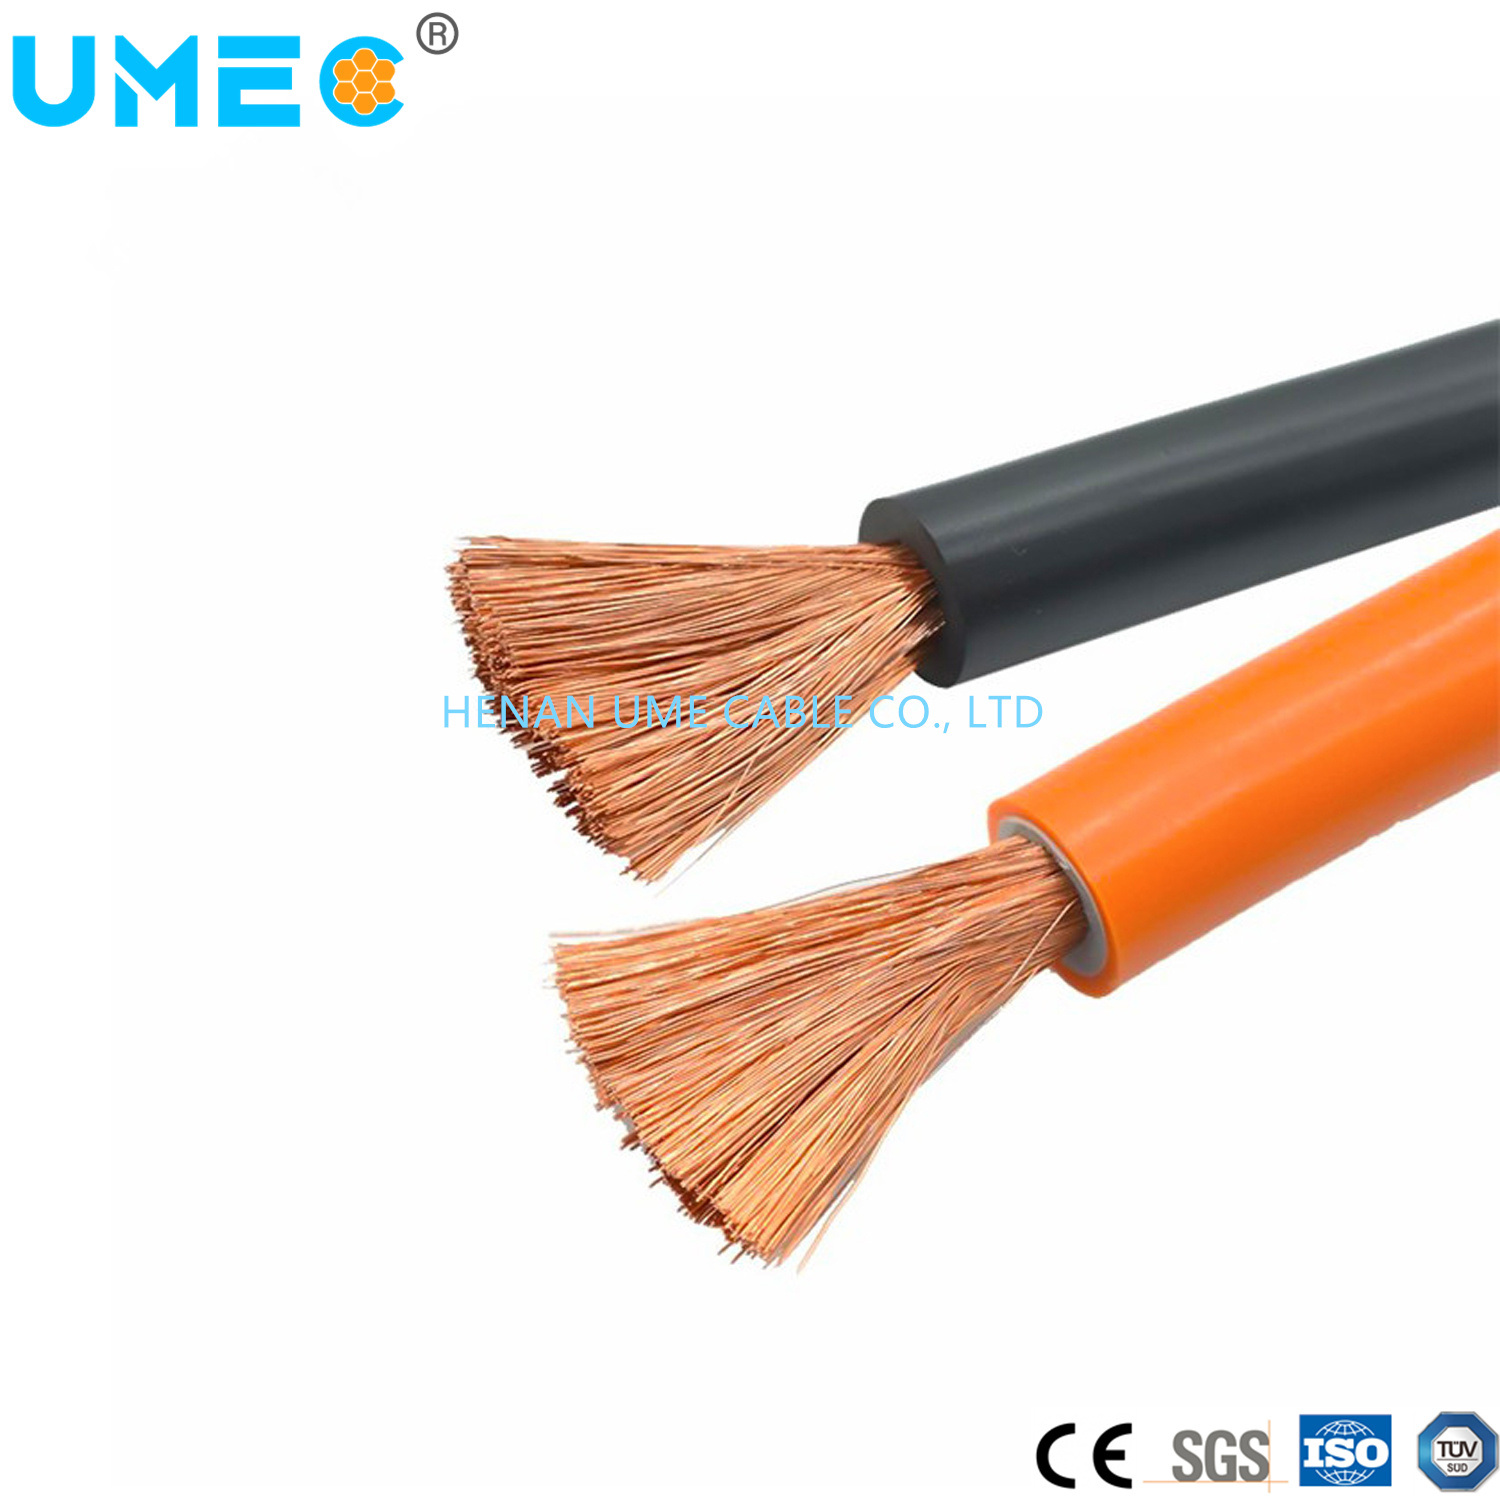 Extra Soft Silicone Cable 0.6/1kv Black or High Transparent Silicone Rubber Copper Conductor Cable 50mm2 Price